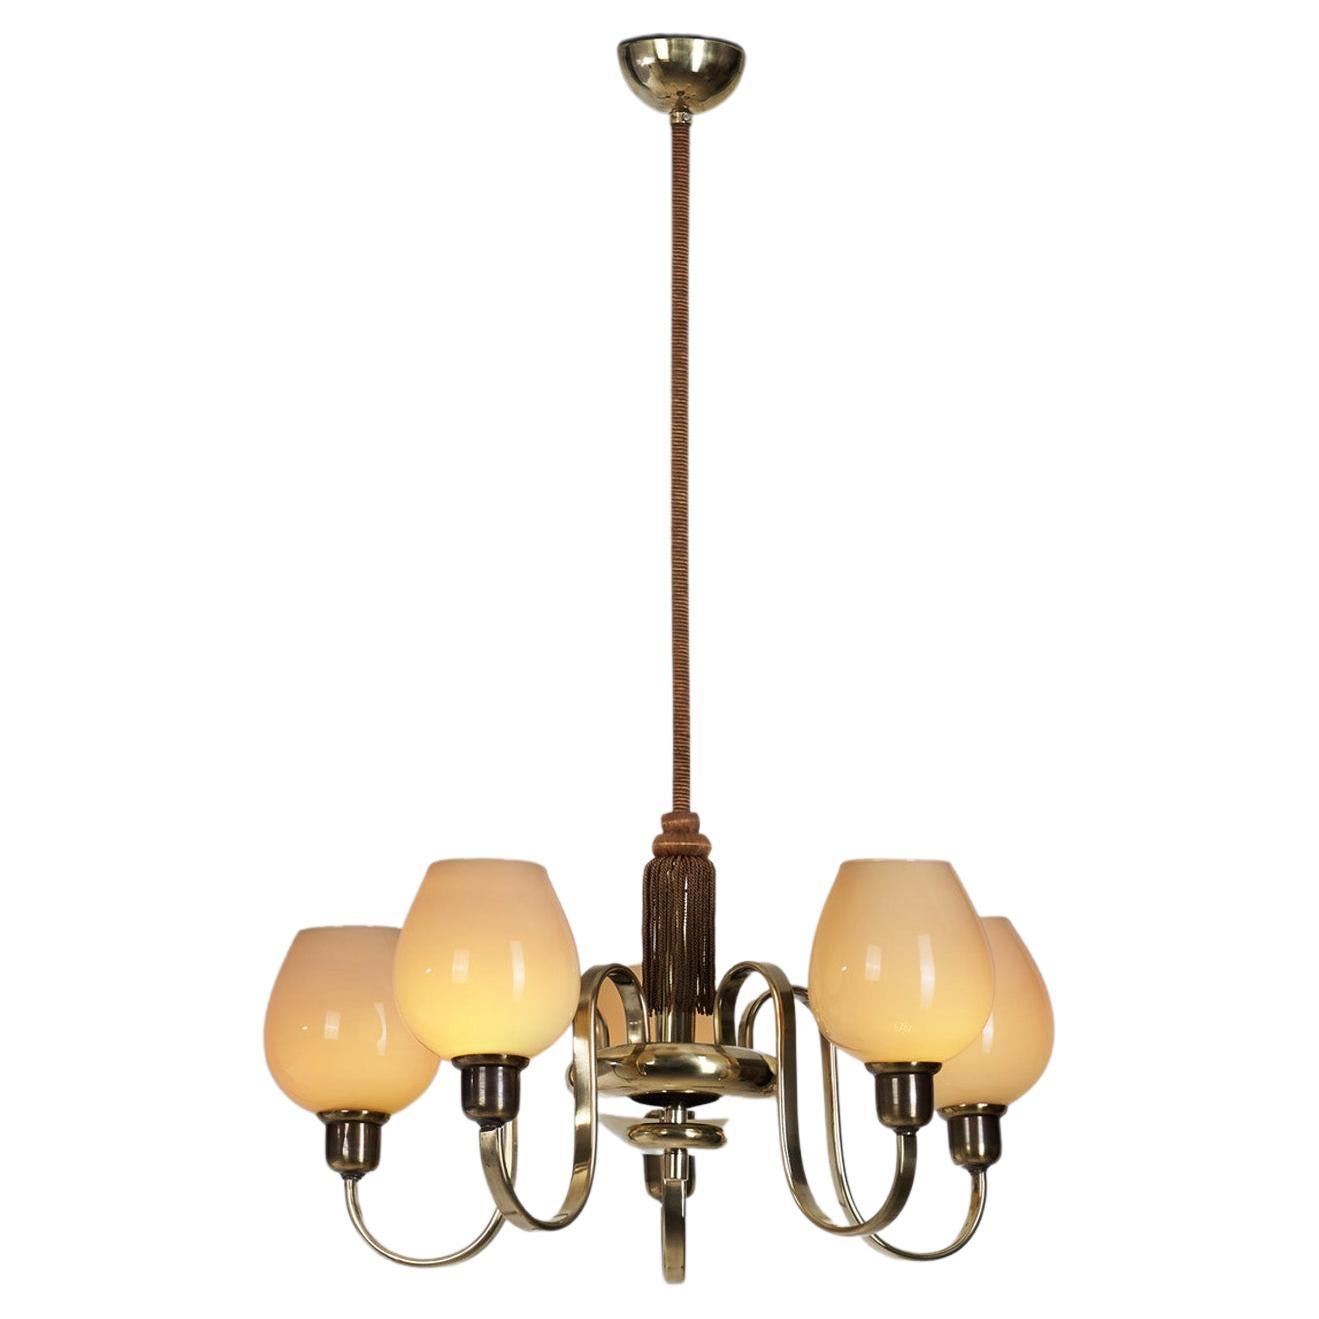 Paavo Tynell Brass Chandelier for Oy Taito AB, Finland, 1930s